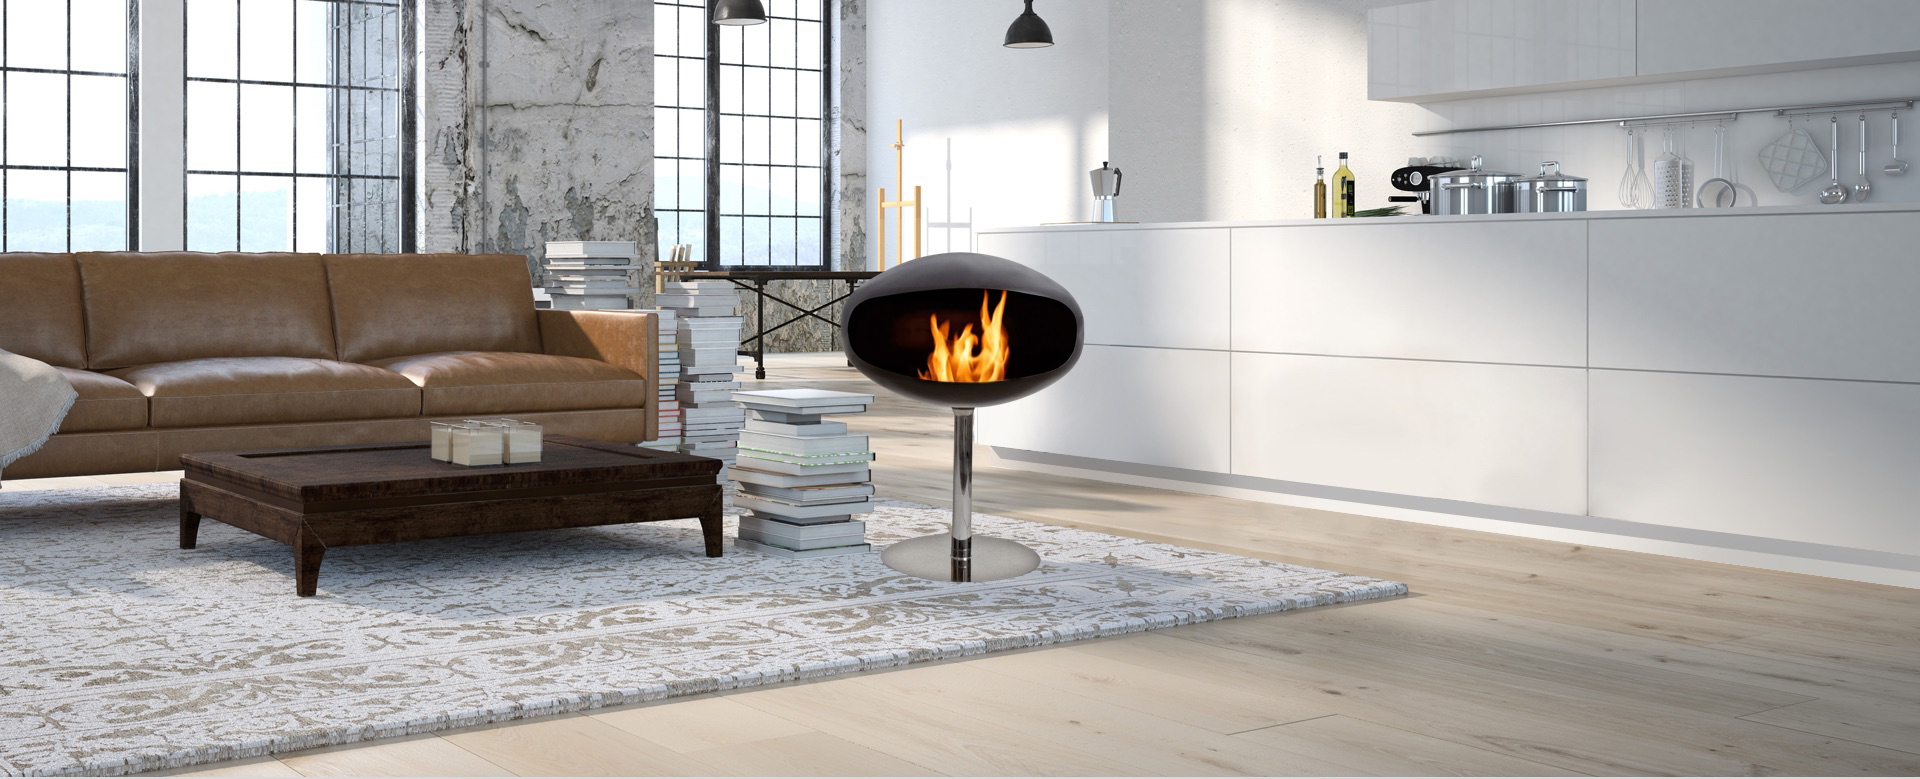 Pedestal: luxury bioethanol fireplace with contemporary design